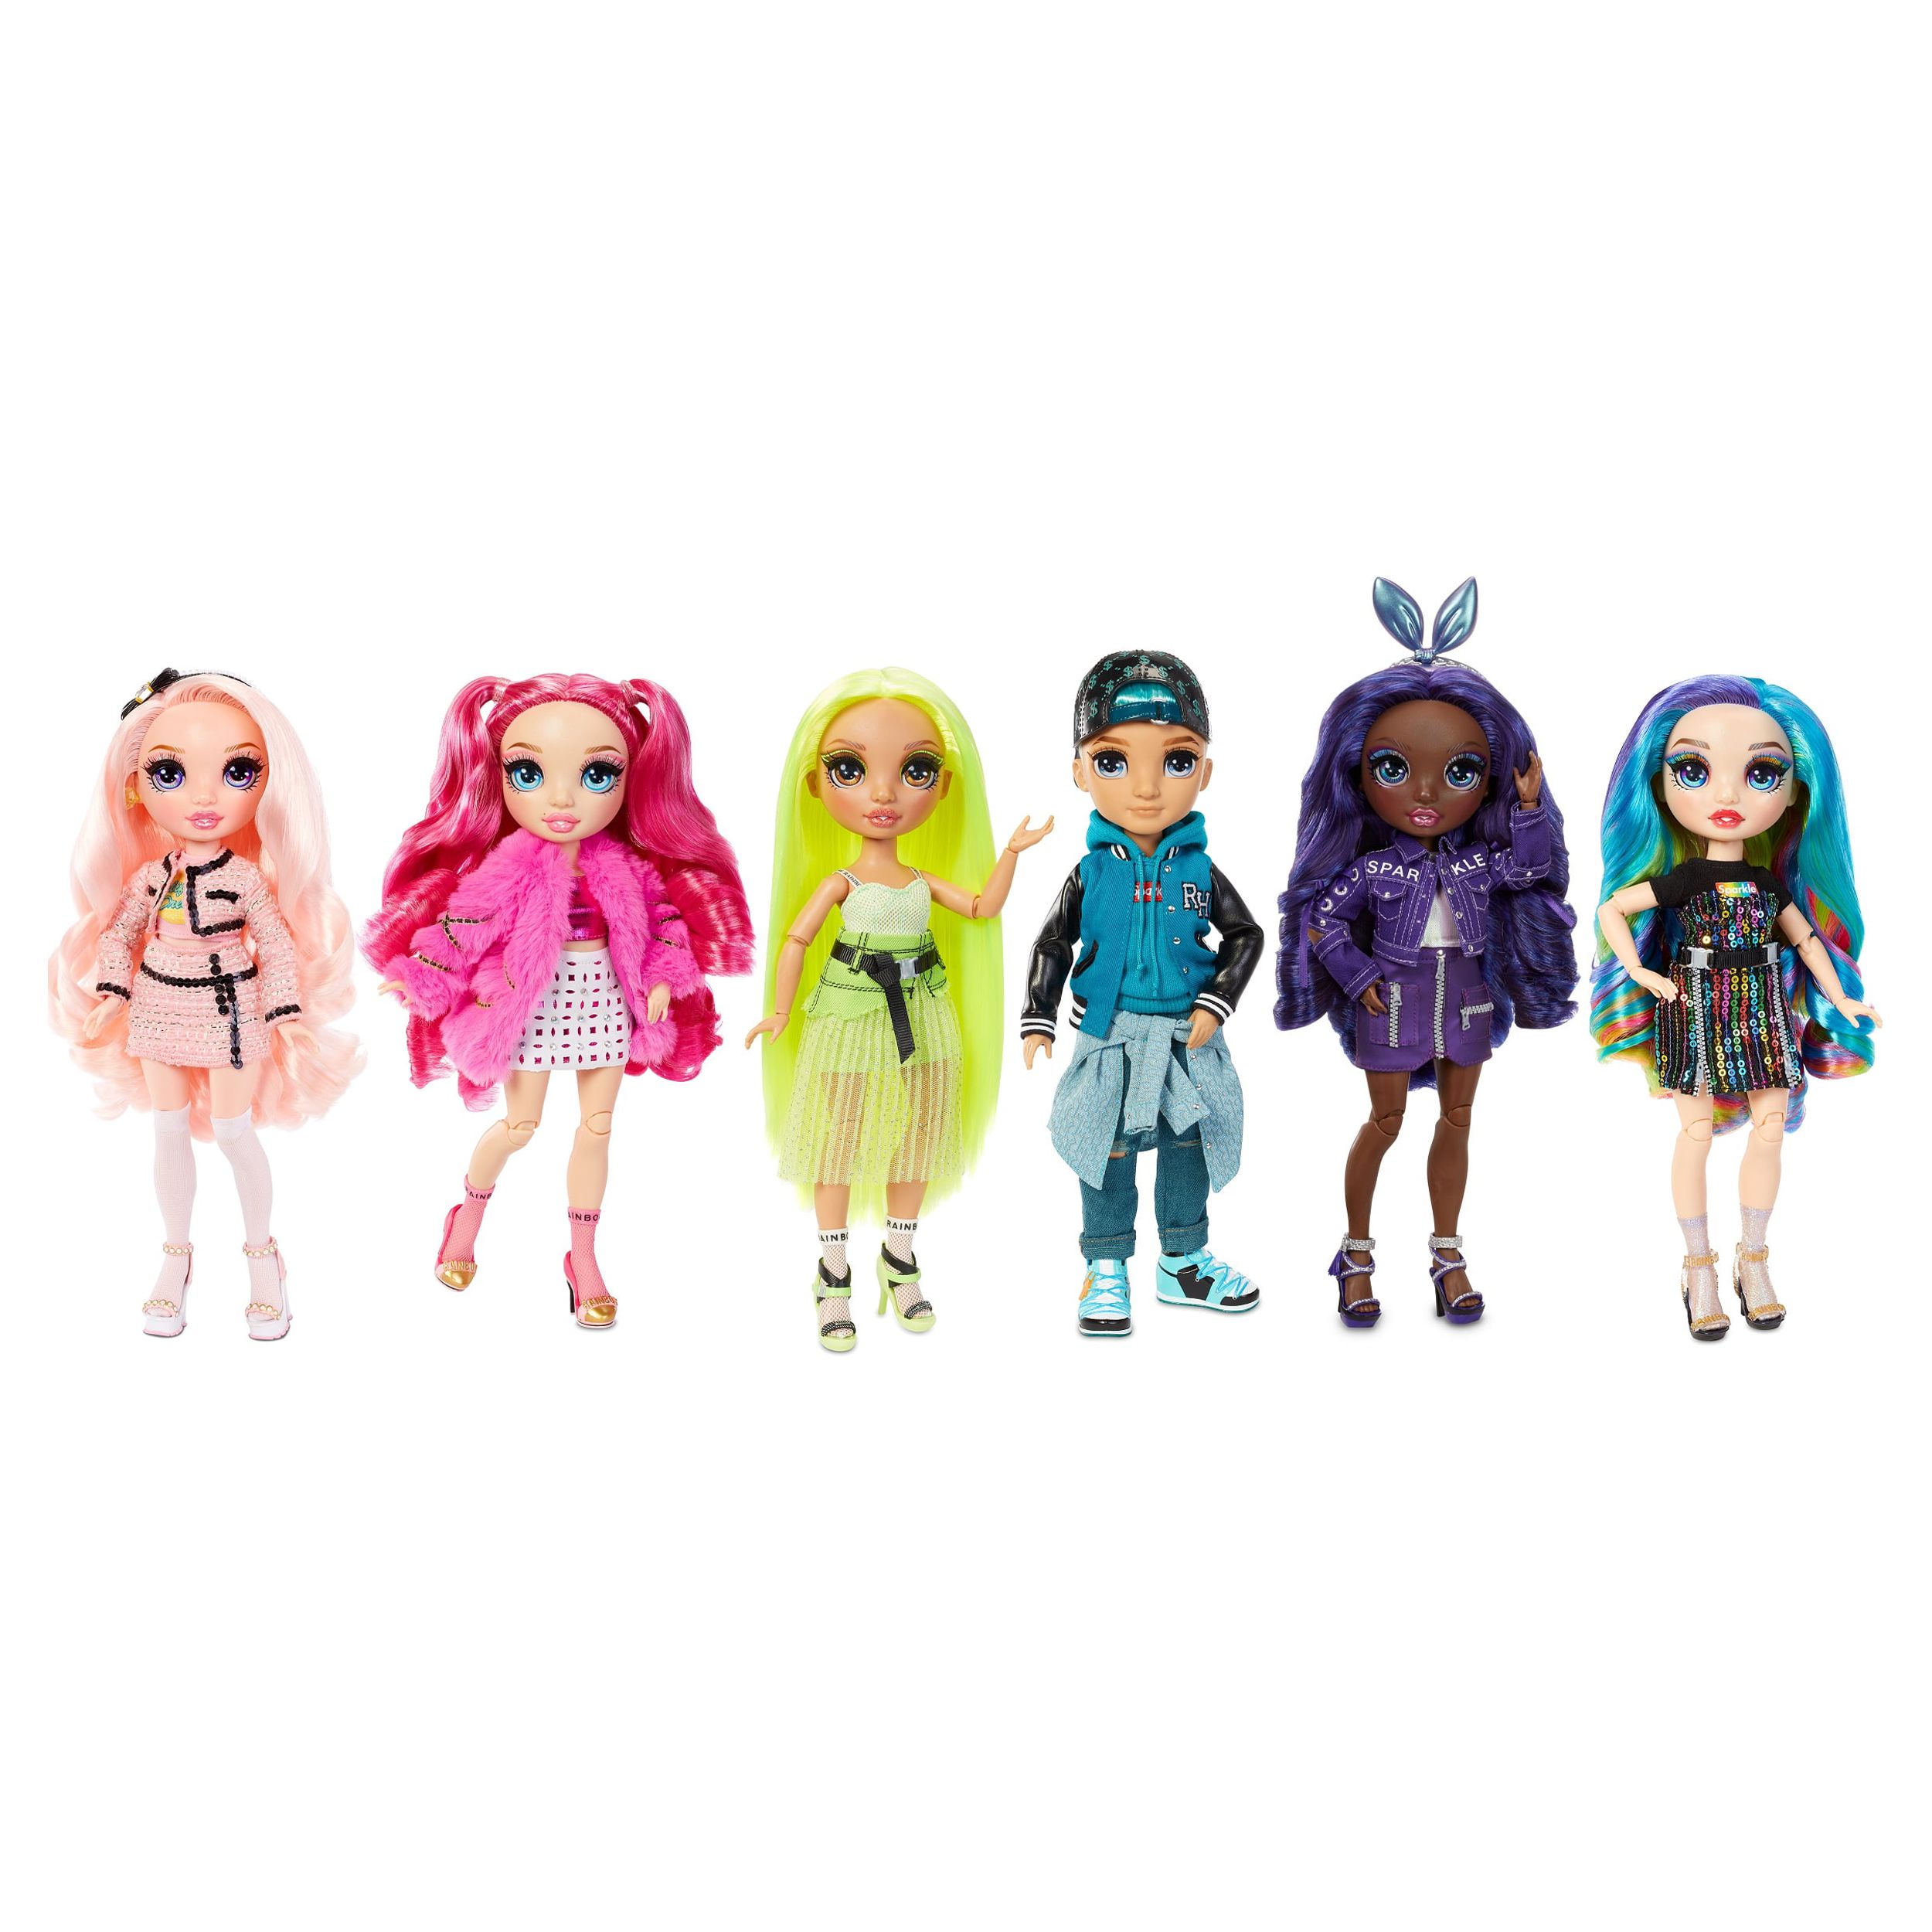 Rainbow High Krystal Bailey – Indigo (Dark Blue Purple) Fashion Doll With 2 Complete Mix & Match Outfits And Accessories, Toys for Kids 6-12 Years Old - image 8 of 8